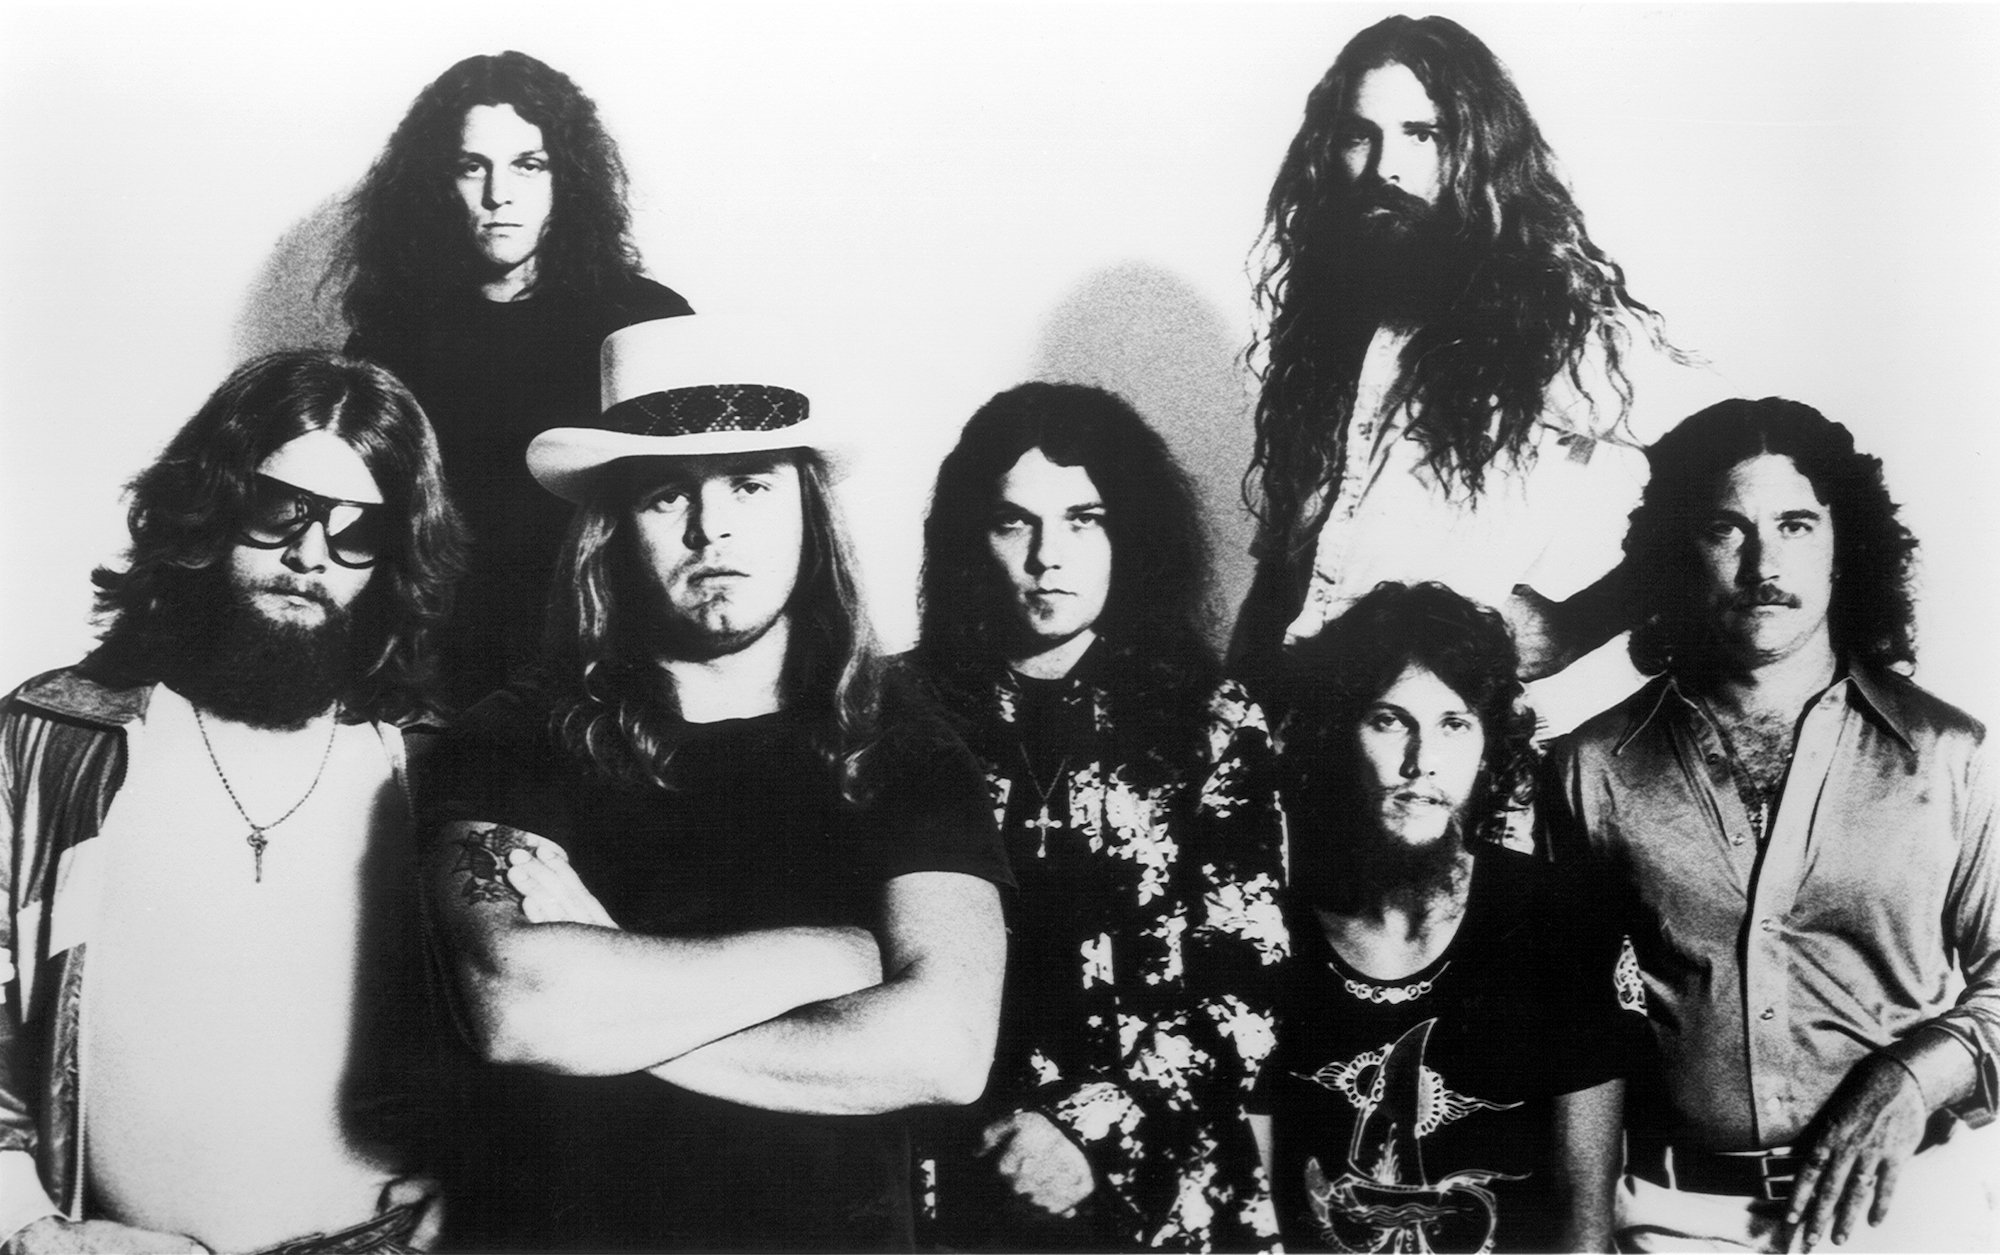 Lynyrd Skynyrd (L-R) Leon Wilkeson, Allen Collins, Gary Rossington, Artimus Pyle (Top), Steve Gaines and Billy Powell looking at the camera not smiling, in black and white